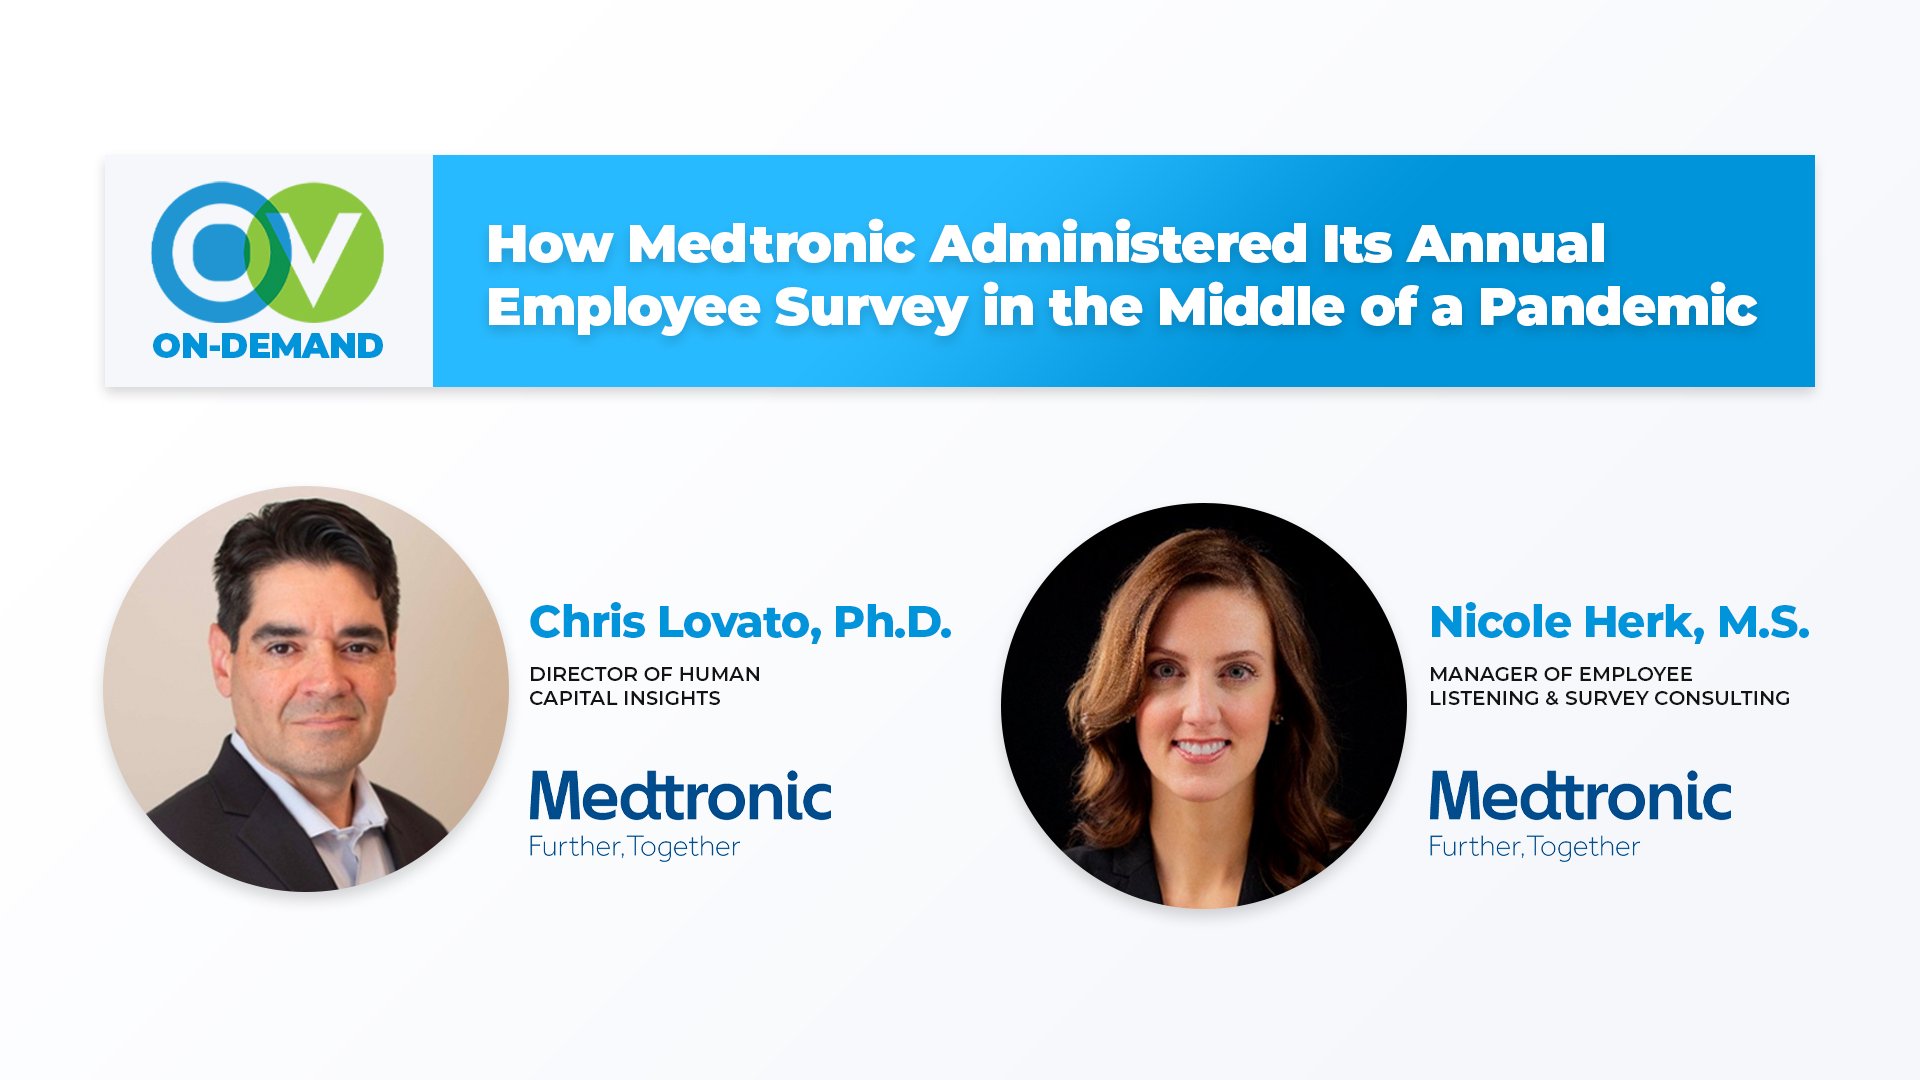 How Medtronic Administered Its Annual Employee Survey in the Middle of a Pandemic